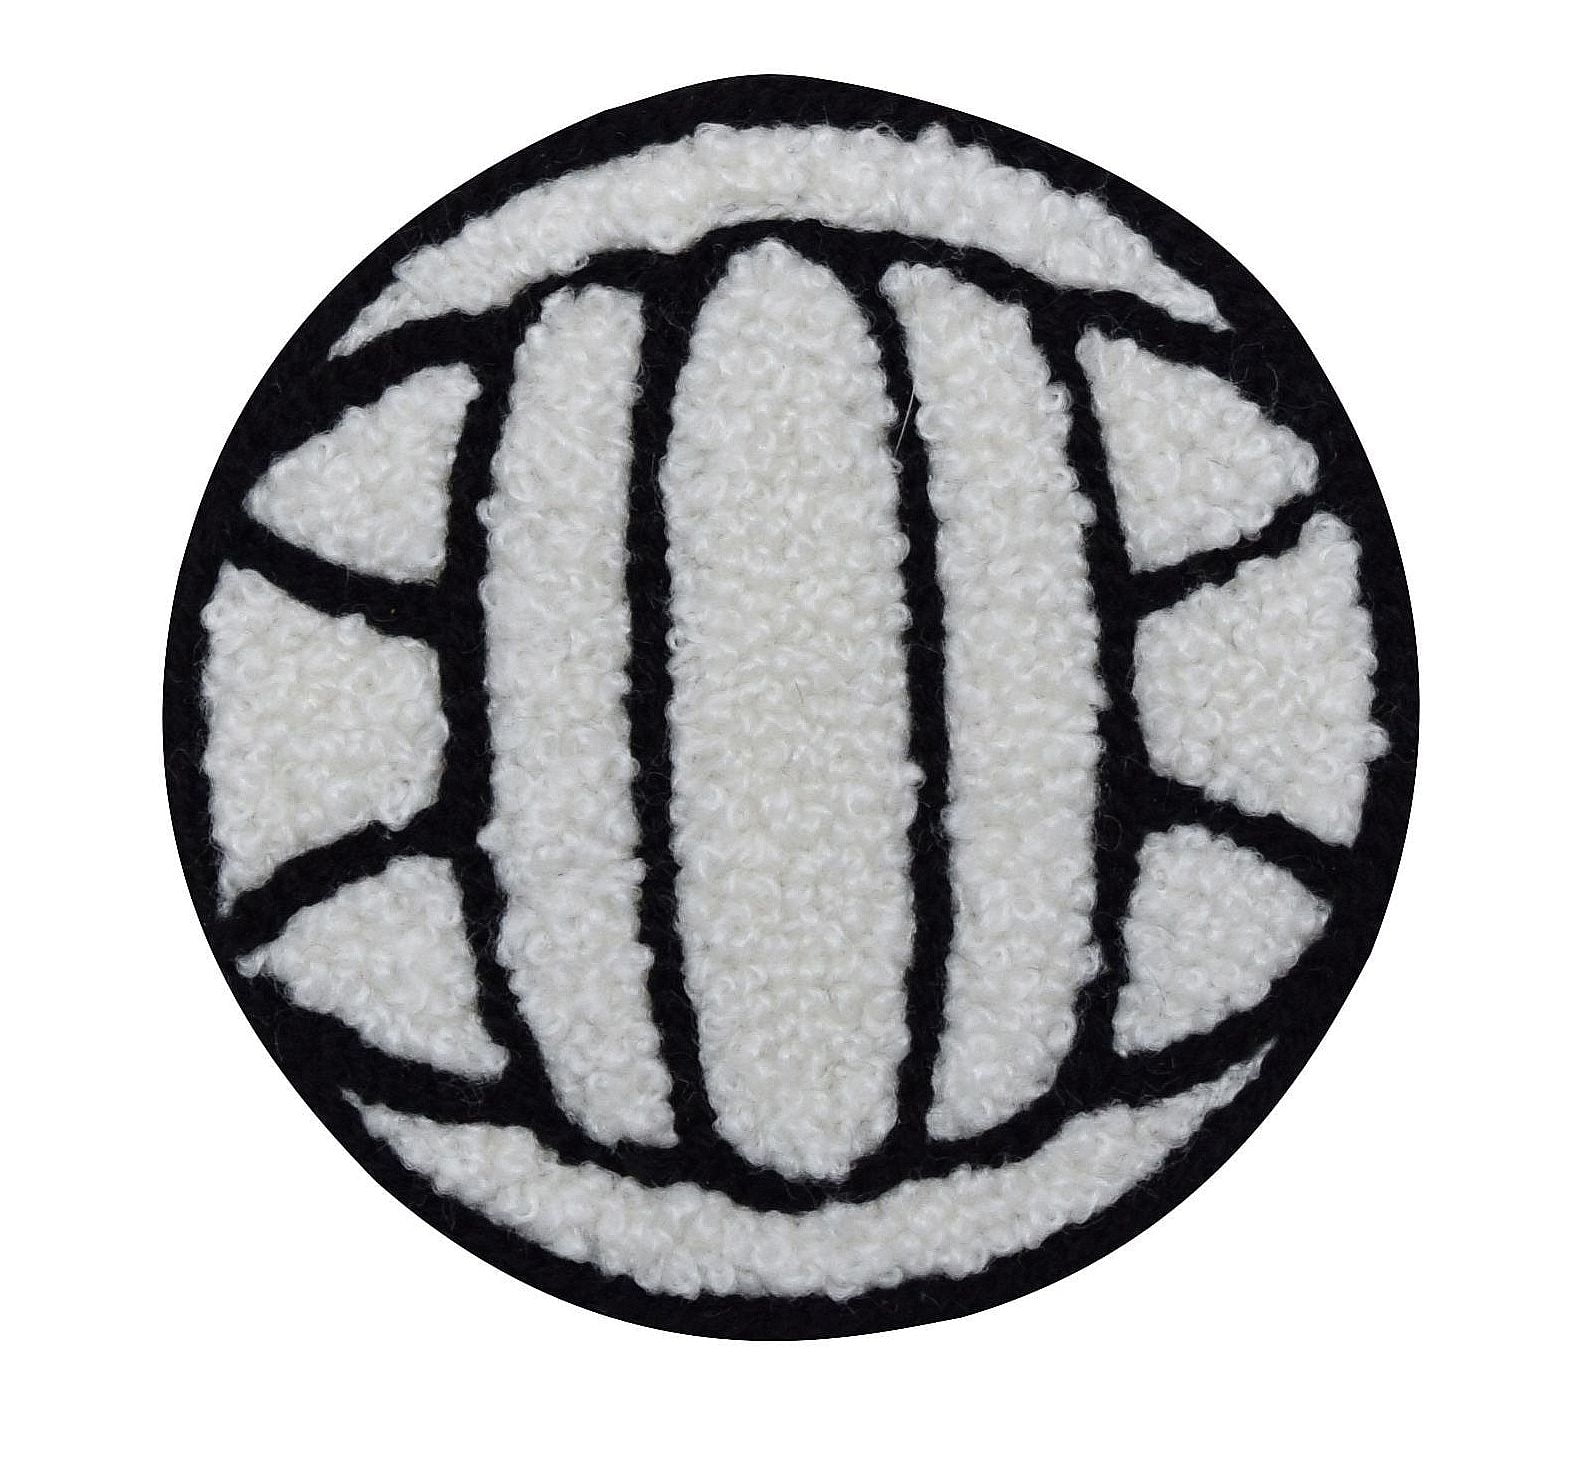 Volleyball Iron On Patches 1.0 inch diameter Set Ups 10-pack 